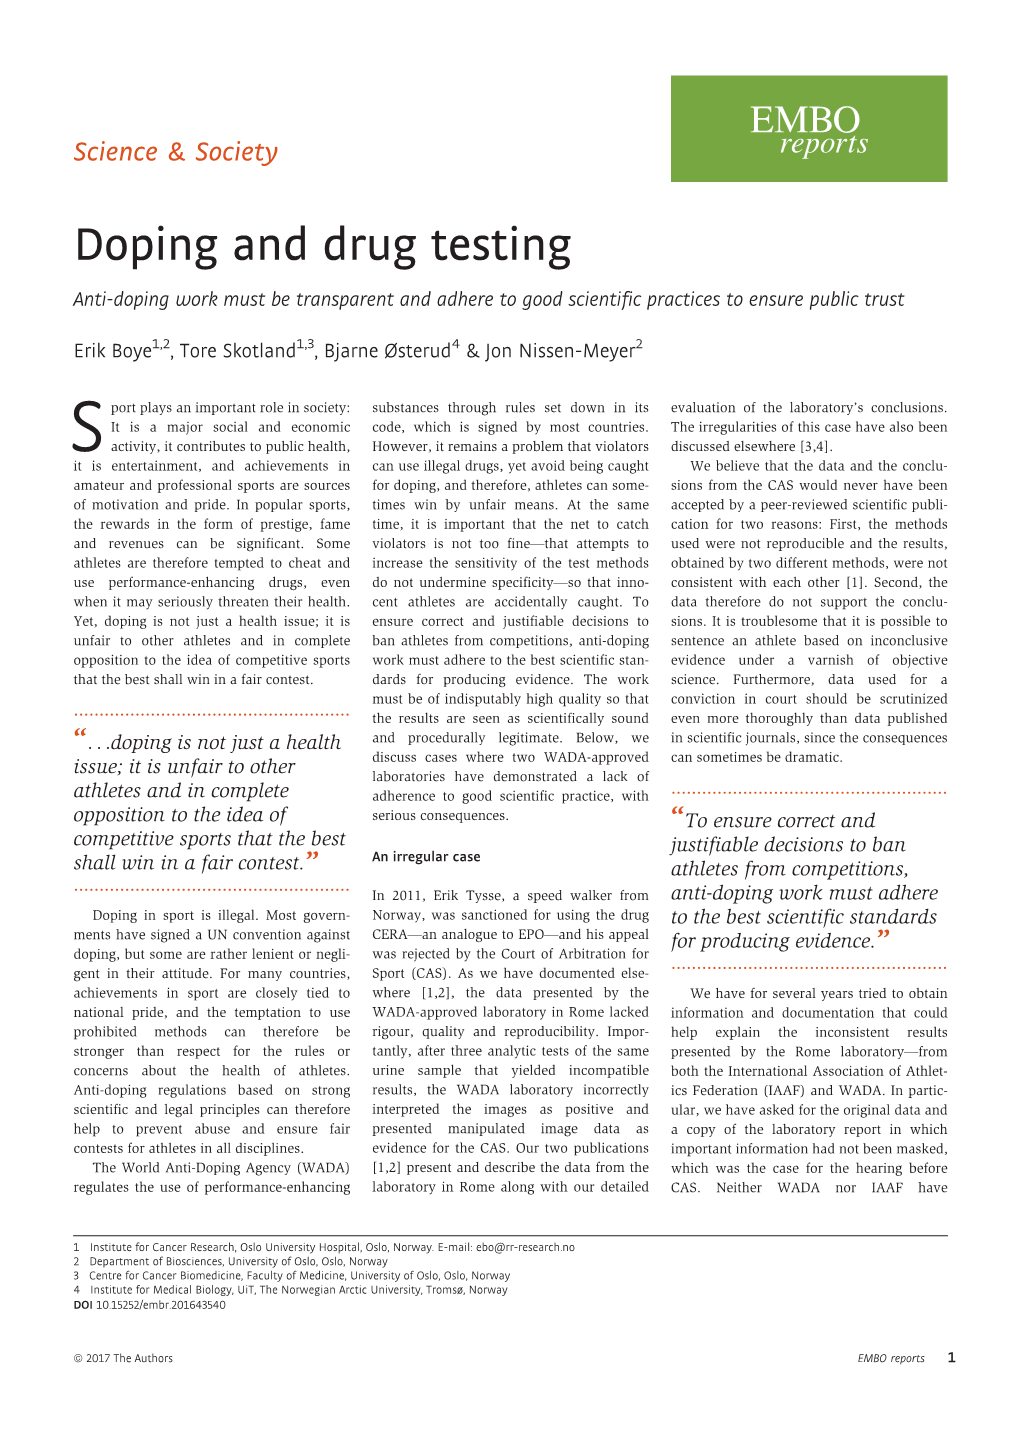 Doping and Drug Testing Anti-Doping Work Must Be Transparent and Adhere to Good Scientific Practices to Ensure Public Trust